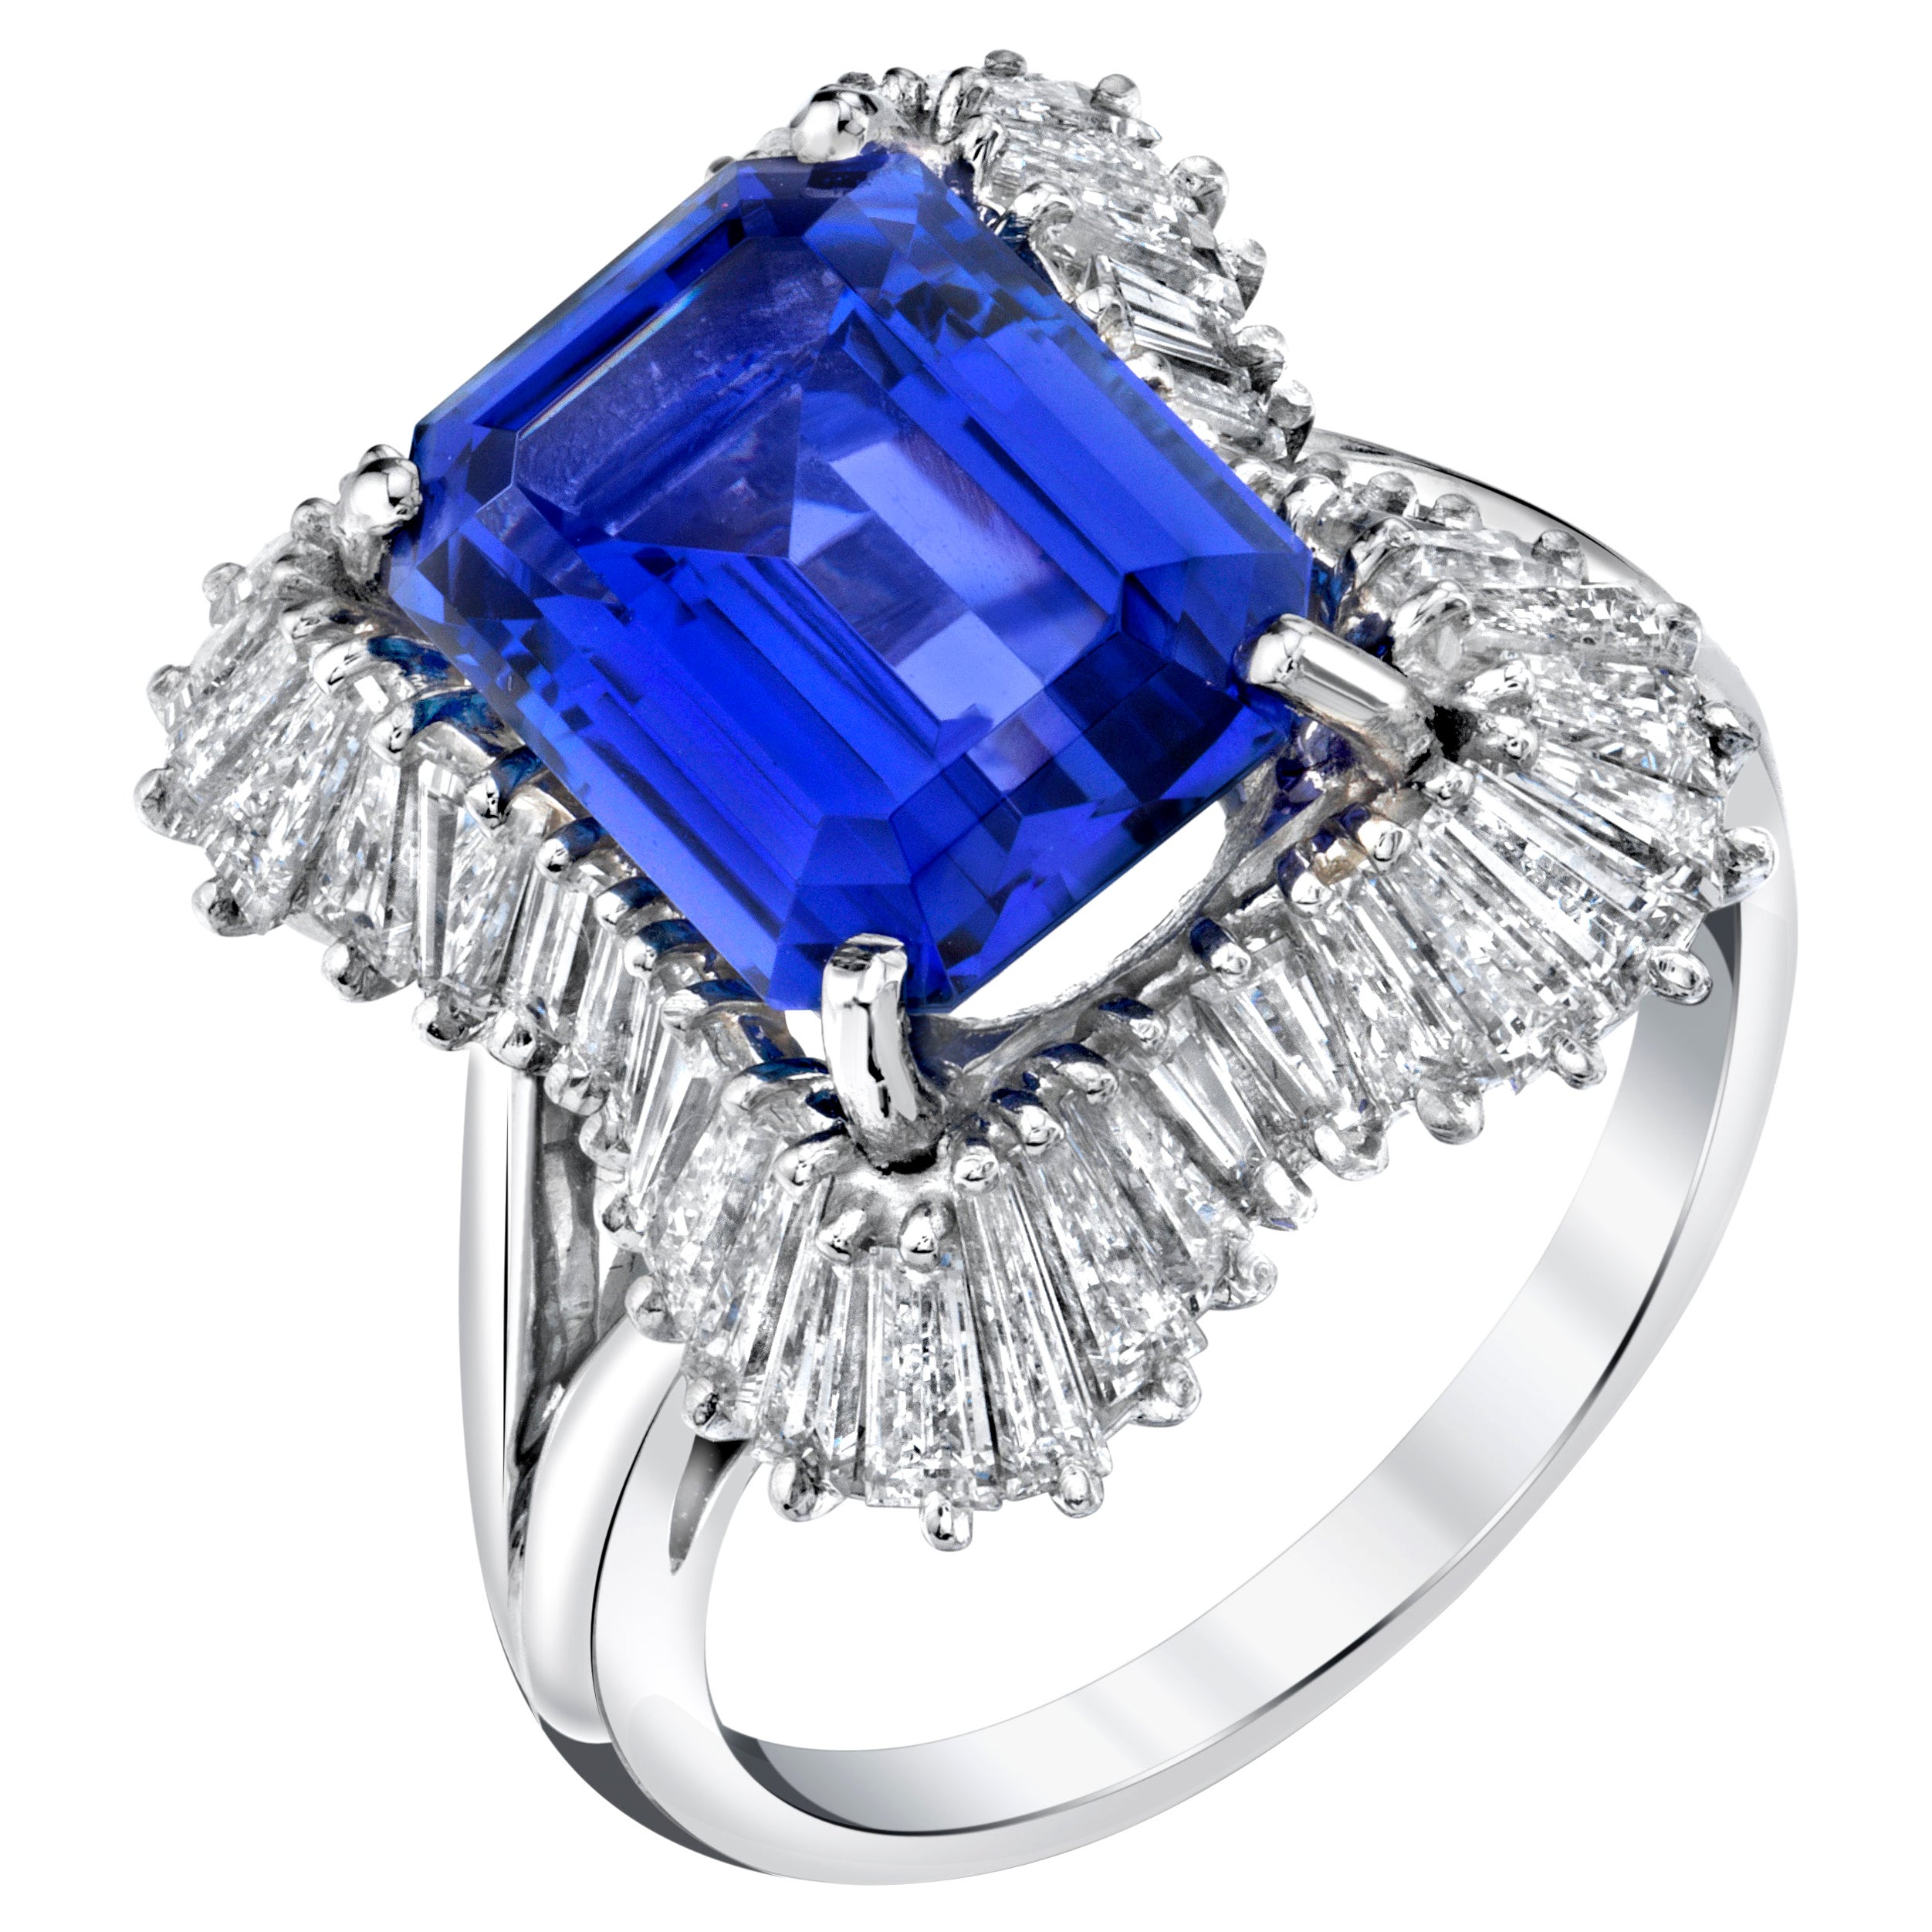 Tanzanite and Diamond Baguette Cocktail Ring in Platinum, 4.89 Carats For Sale